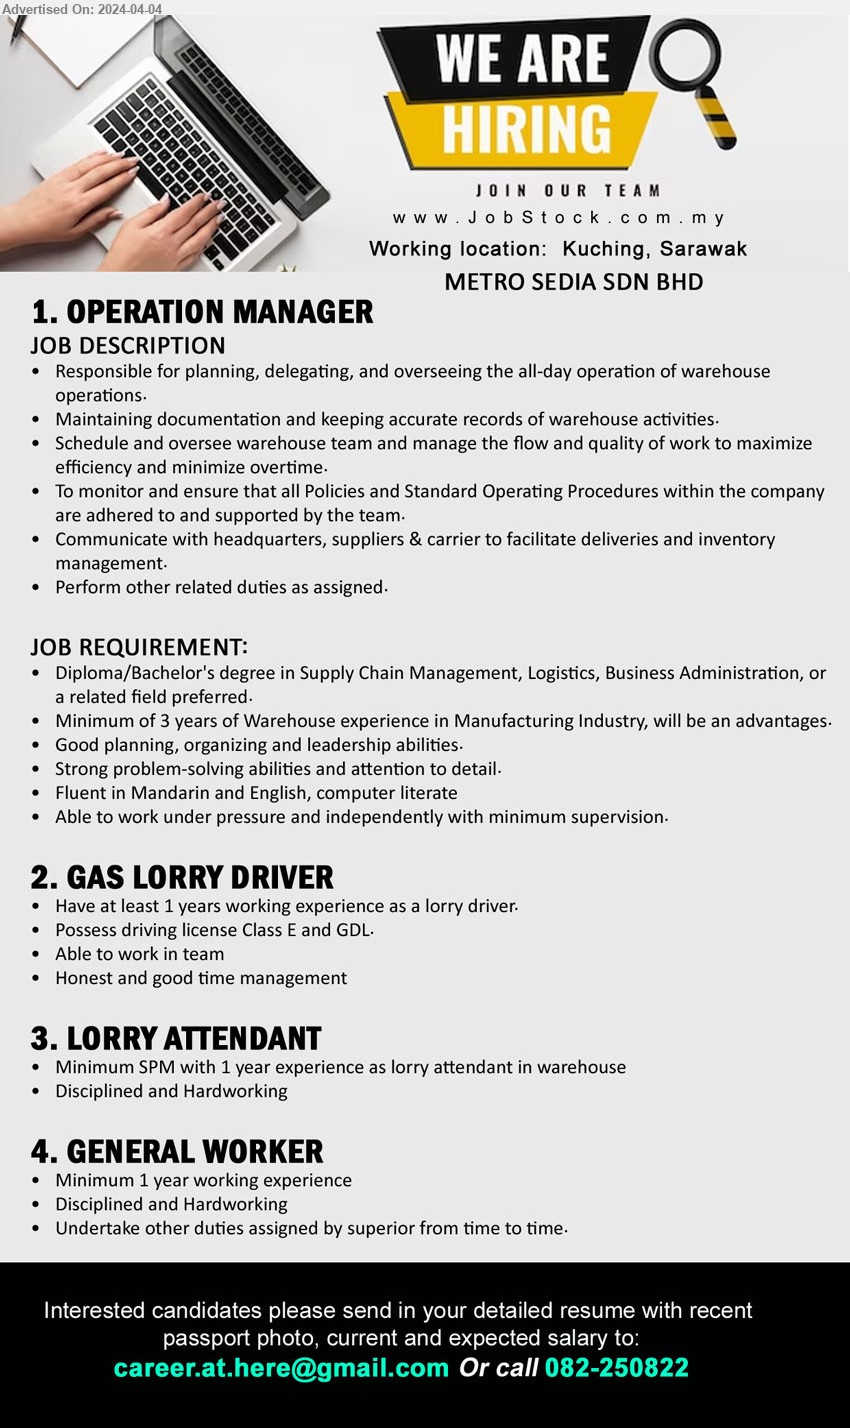 METRO SEDIA SDN BHD - 1. OPERATION MANAGER (Kuching), Diploma/Bachelor's Degree in Supply Chain Management, Logistics, Business Administration,...
2. GAS LORRY DRIVER (Kuching), Have at least 1 years working experience as a lorry driver, Possess driving license Class E and GDL.,...
3. LORRY ATTENDANT (Kuching), Minimum SPM with 1 year experience as lorry attendant in warehouse,...
4. GENERAL WORKER (Kuching), Minimum 1 year working experience, Disciplined and Hardworking,...
Call 082-250822 / Email resume to ...
